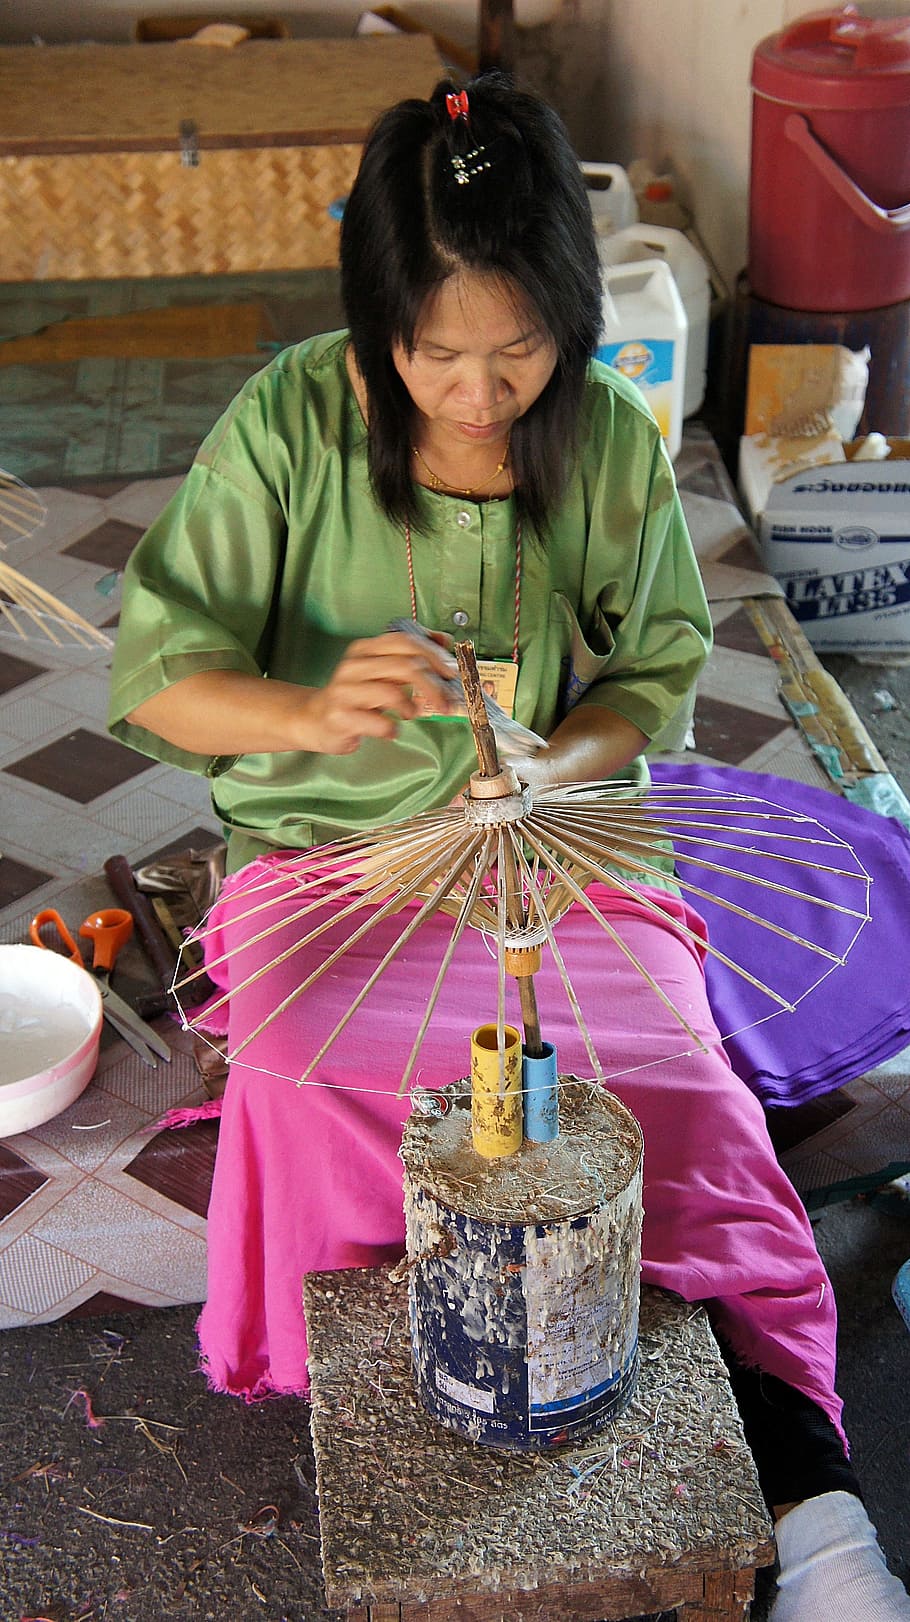 paper, umbrella, manufacture, assembly, chiang mai, creative, thailand, women, females, one person